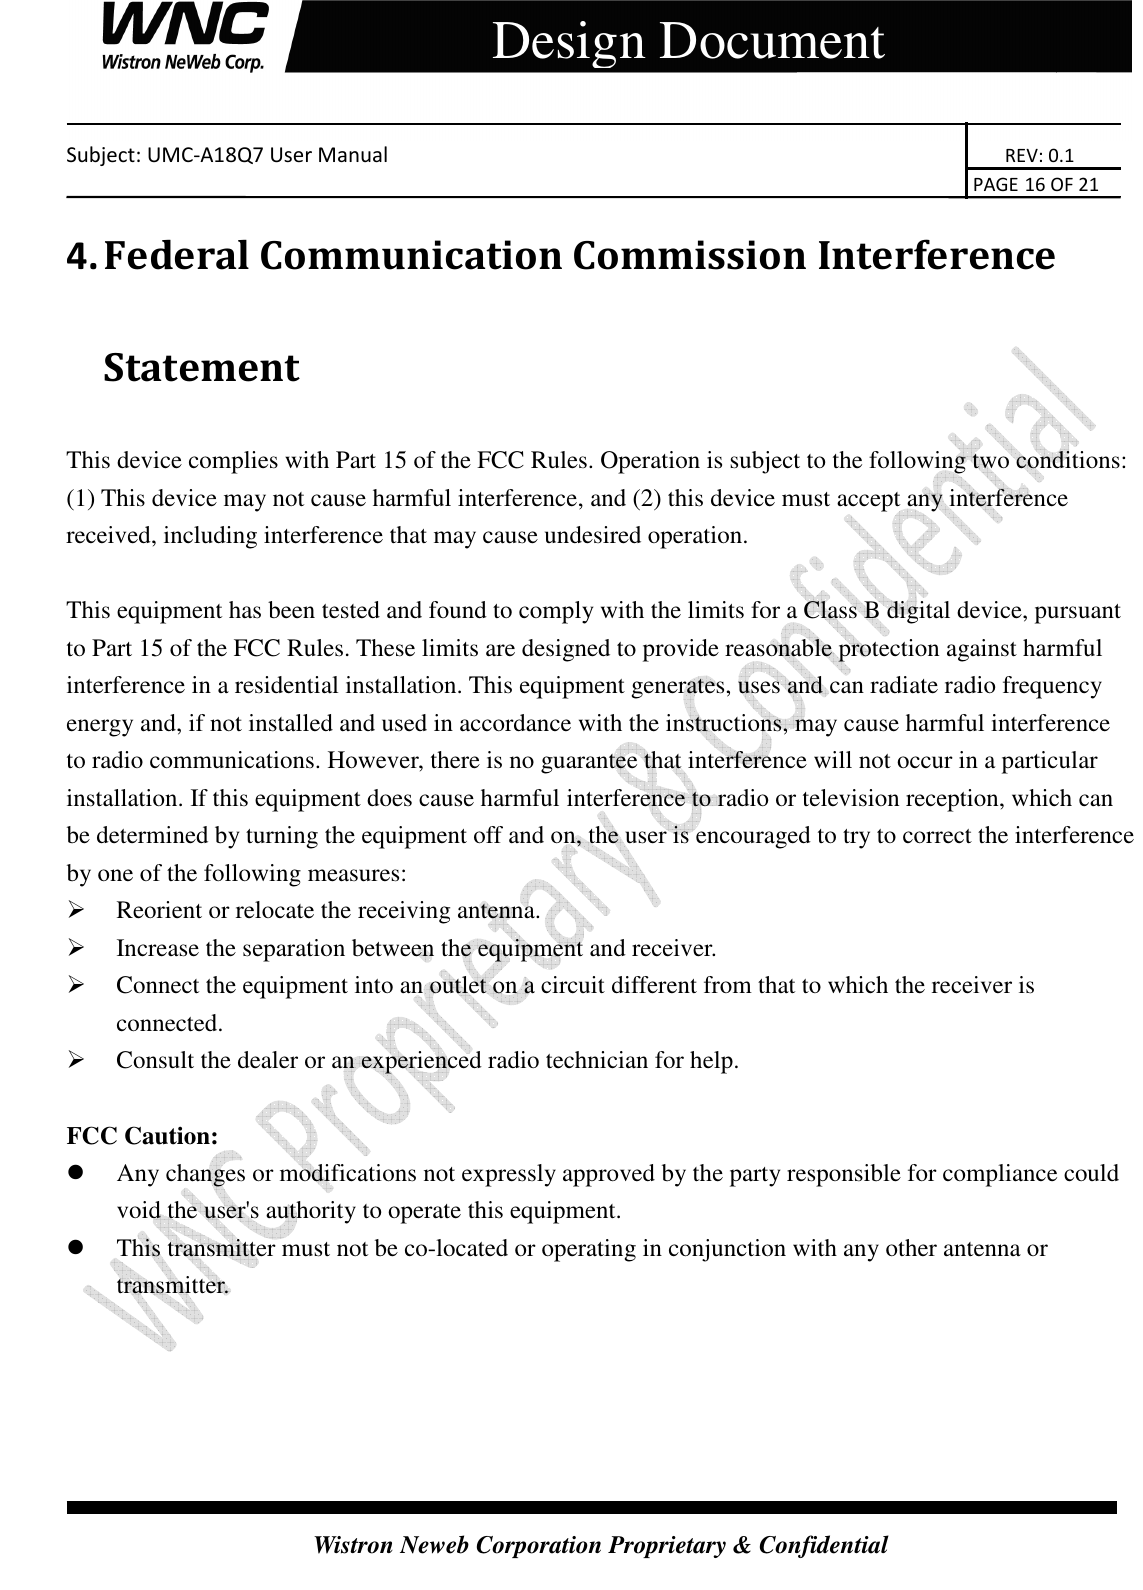    Subject: UMC-A18Q7 User Manual                                                                       REV: 0.1                                                                                                                                                                               PAGE 16 OF 21  Wistron Neweb Corporation Proprietary &amp; Confidential     Design Document 4. Federal Communication Commission Interference Statement This device complies with Part 15 of the FCC Rules. Operation is subject to the following two conditions: (1) This device may not cause harmful interference, and (2) this device must accept any interference received, including interference that may cause undesired operation.  This equipment has been tested and found to comply with the limits for a Class B digital device, pursuant to Part 15 of the FCC Rules. These limits are designed to provide reasonable protection against harmful interference in a residential installation. This equipment generates, uses and can radiate radio frequency energy and, if not installed and used in accordance with the instructions, may cause harmful interference to radio communications. However, there is no guarantee that interference will not occur in a particular installation. If this equipment does cause harmful interference to radio or television reception, which can be determined by turning the equipment off and on, the user is encouraged to try to correct the interference by one of the following measures:  Reorient or relocate the receiving antenna.  Increase the separation between the equipment and receiver.  Connect the equipment into an outlet on a circuit different from that to which the receiver is connected.  Consult the dealer or an experienced radio technician for help.  FCC Caution:  Any changes or modifications not expressly approved by the party responsible for compliance could void the user&apos;s authority to operate this equipment.  This transmitter must not be co-located or operating in conjunction with any other antenna or transmitter.      